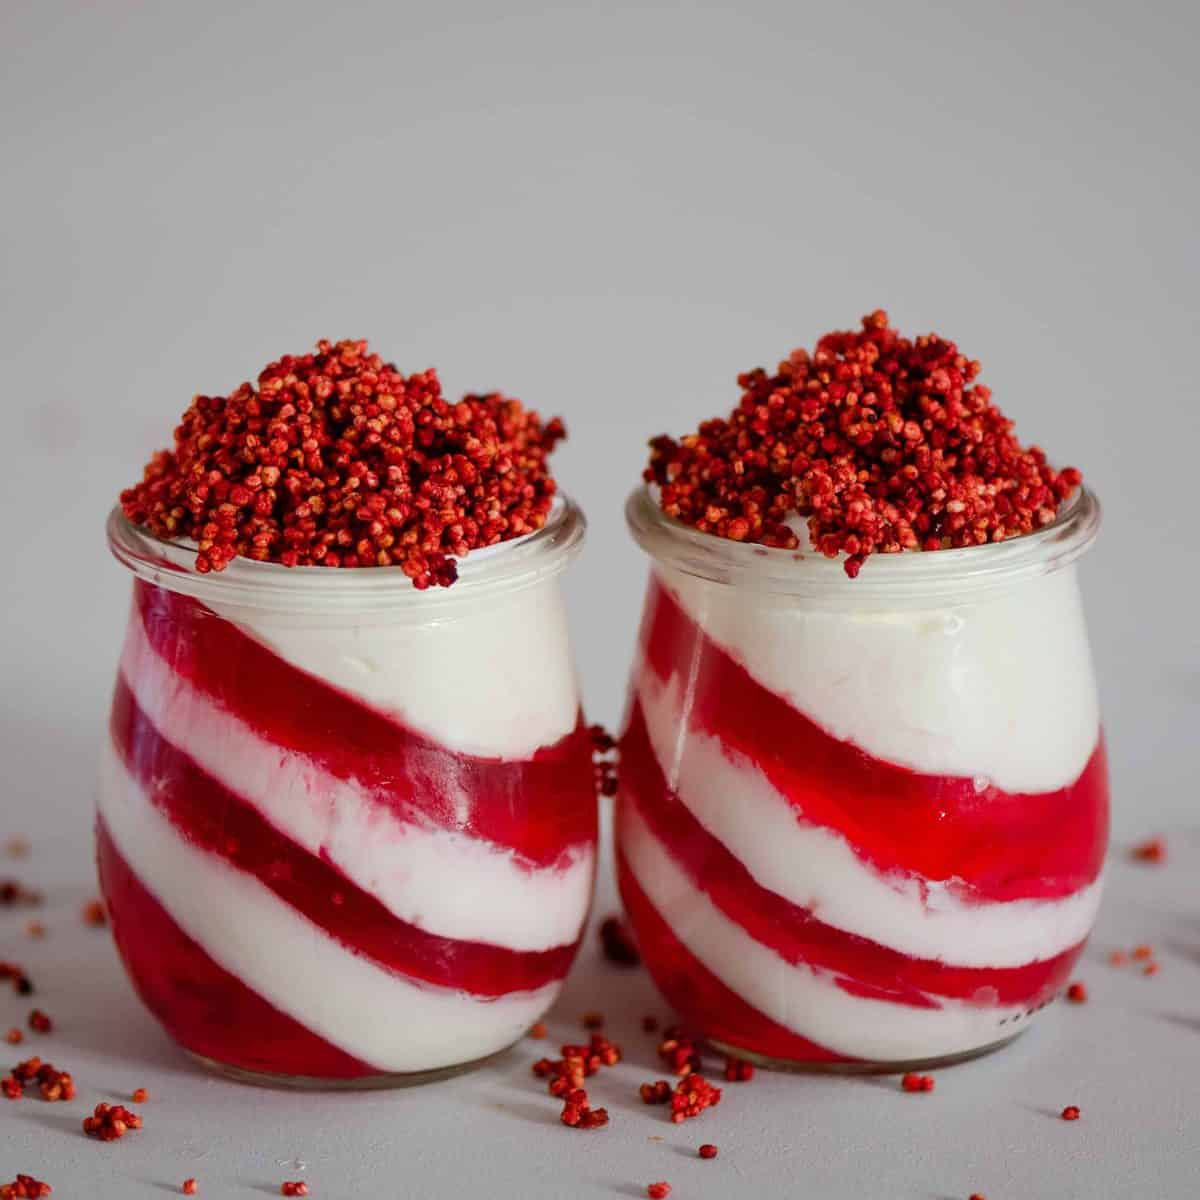 candy cane yogurt jelly jars topped with puffed quinoa